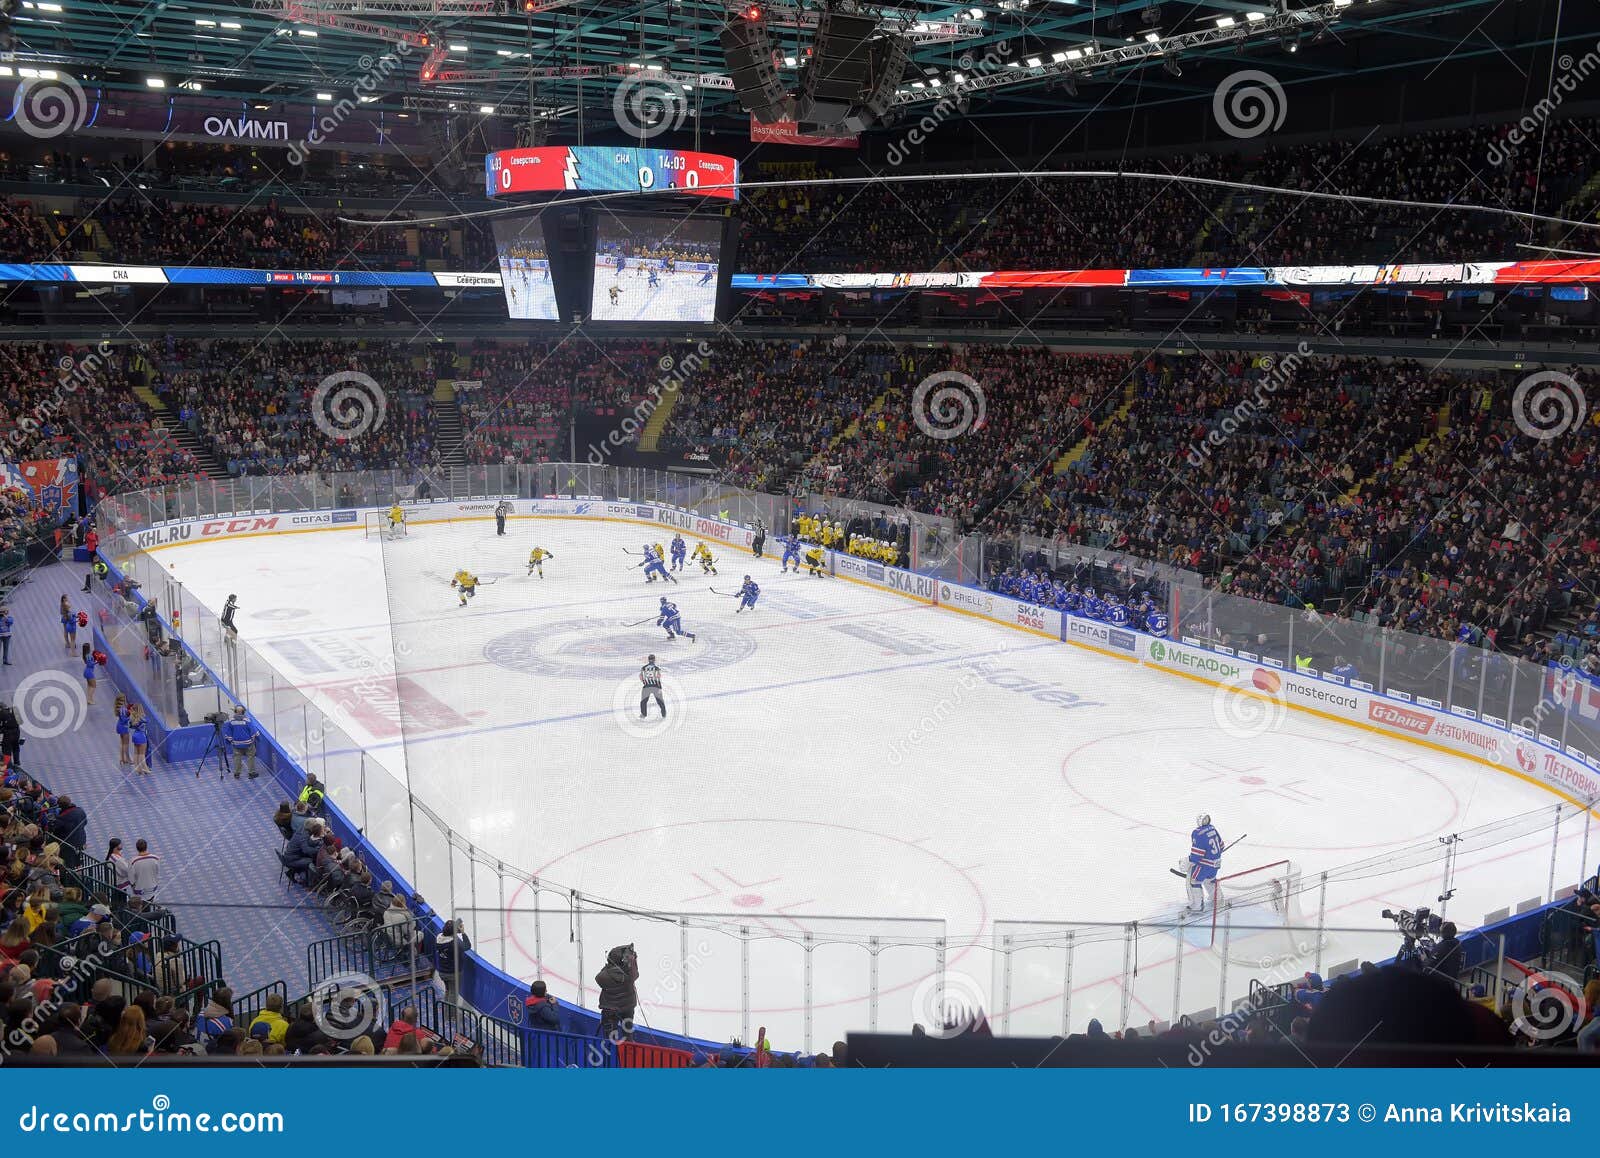 KHL Hockey Match, Spectators in the Stands and the Playing Field Editorial Stock Photo